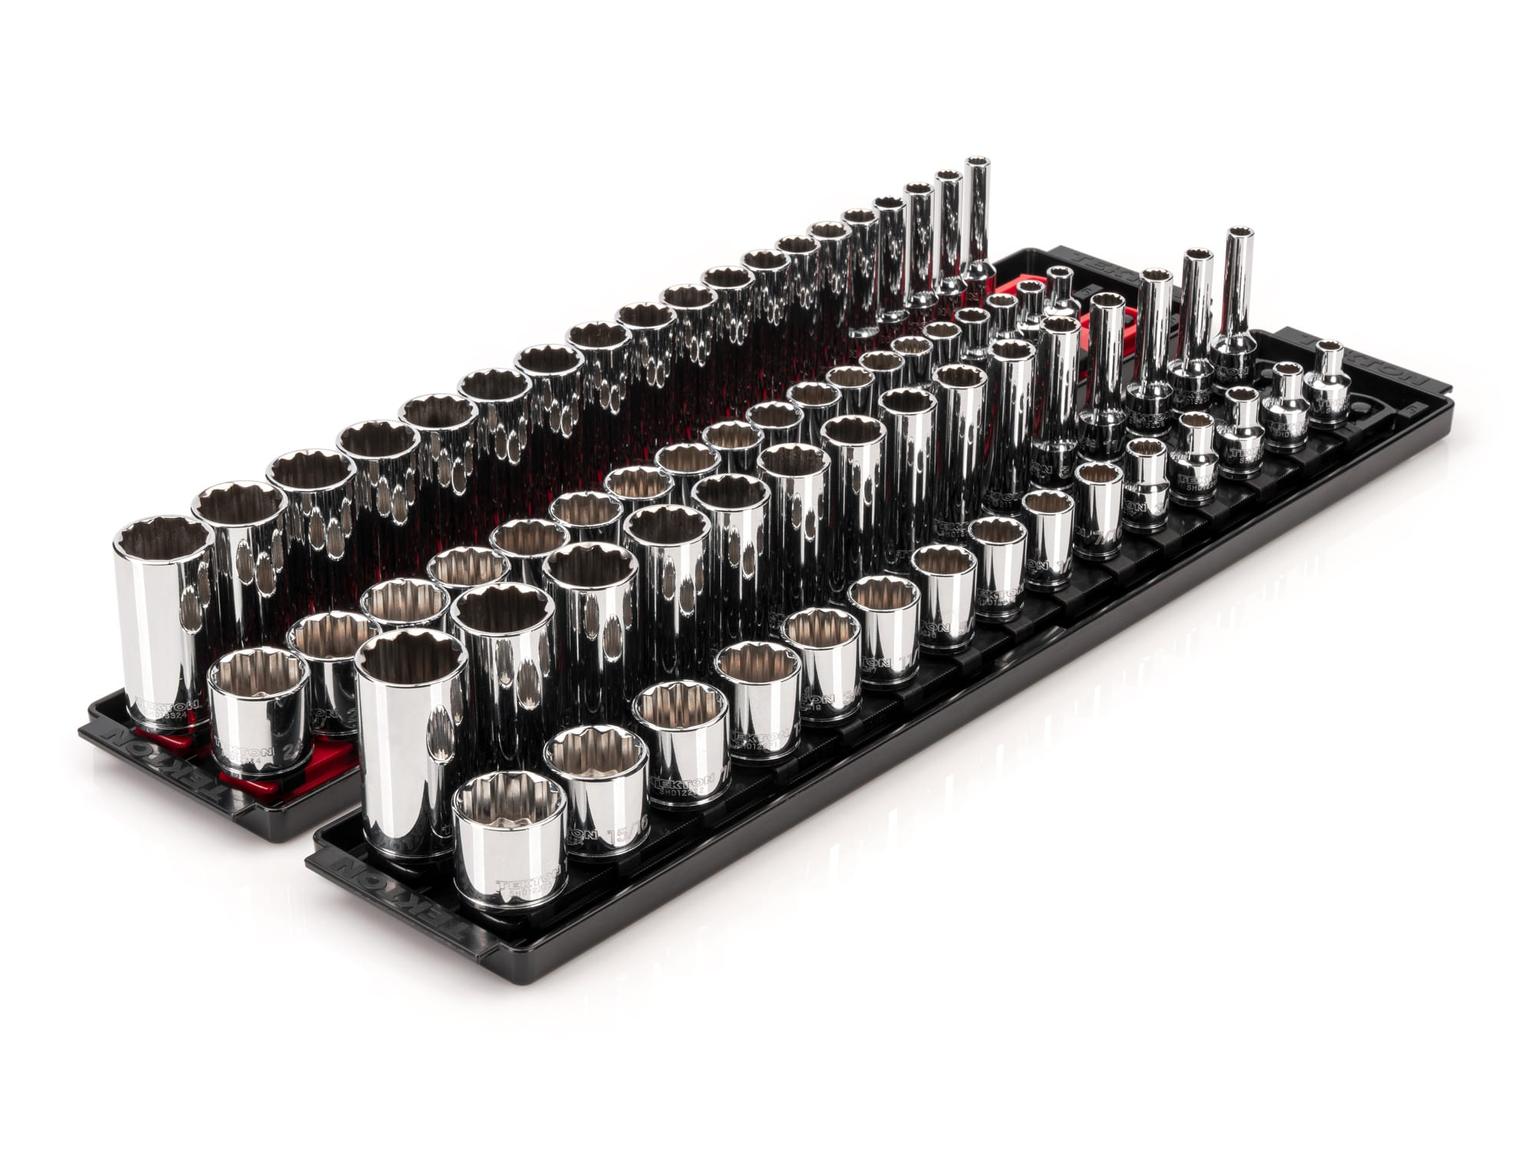 TEKTON SHD91221-T 3/8 Inch Drive 12-Point Socket Set with Rails, 68-Piece (1/4-1 in., 6-24 mm)